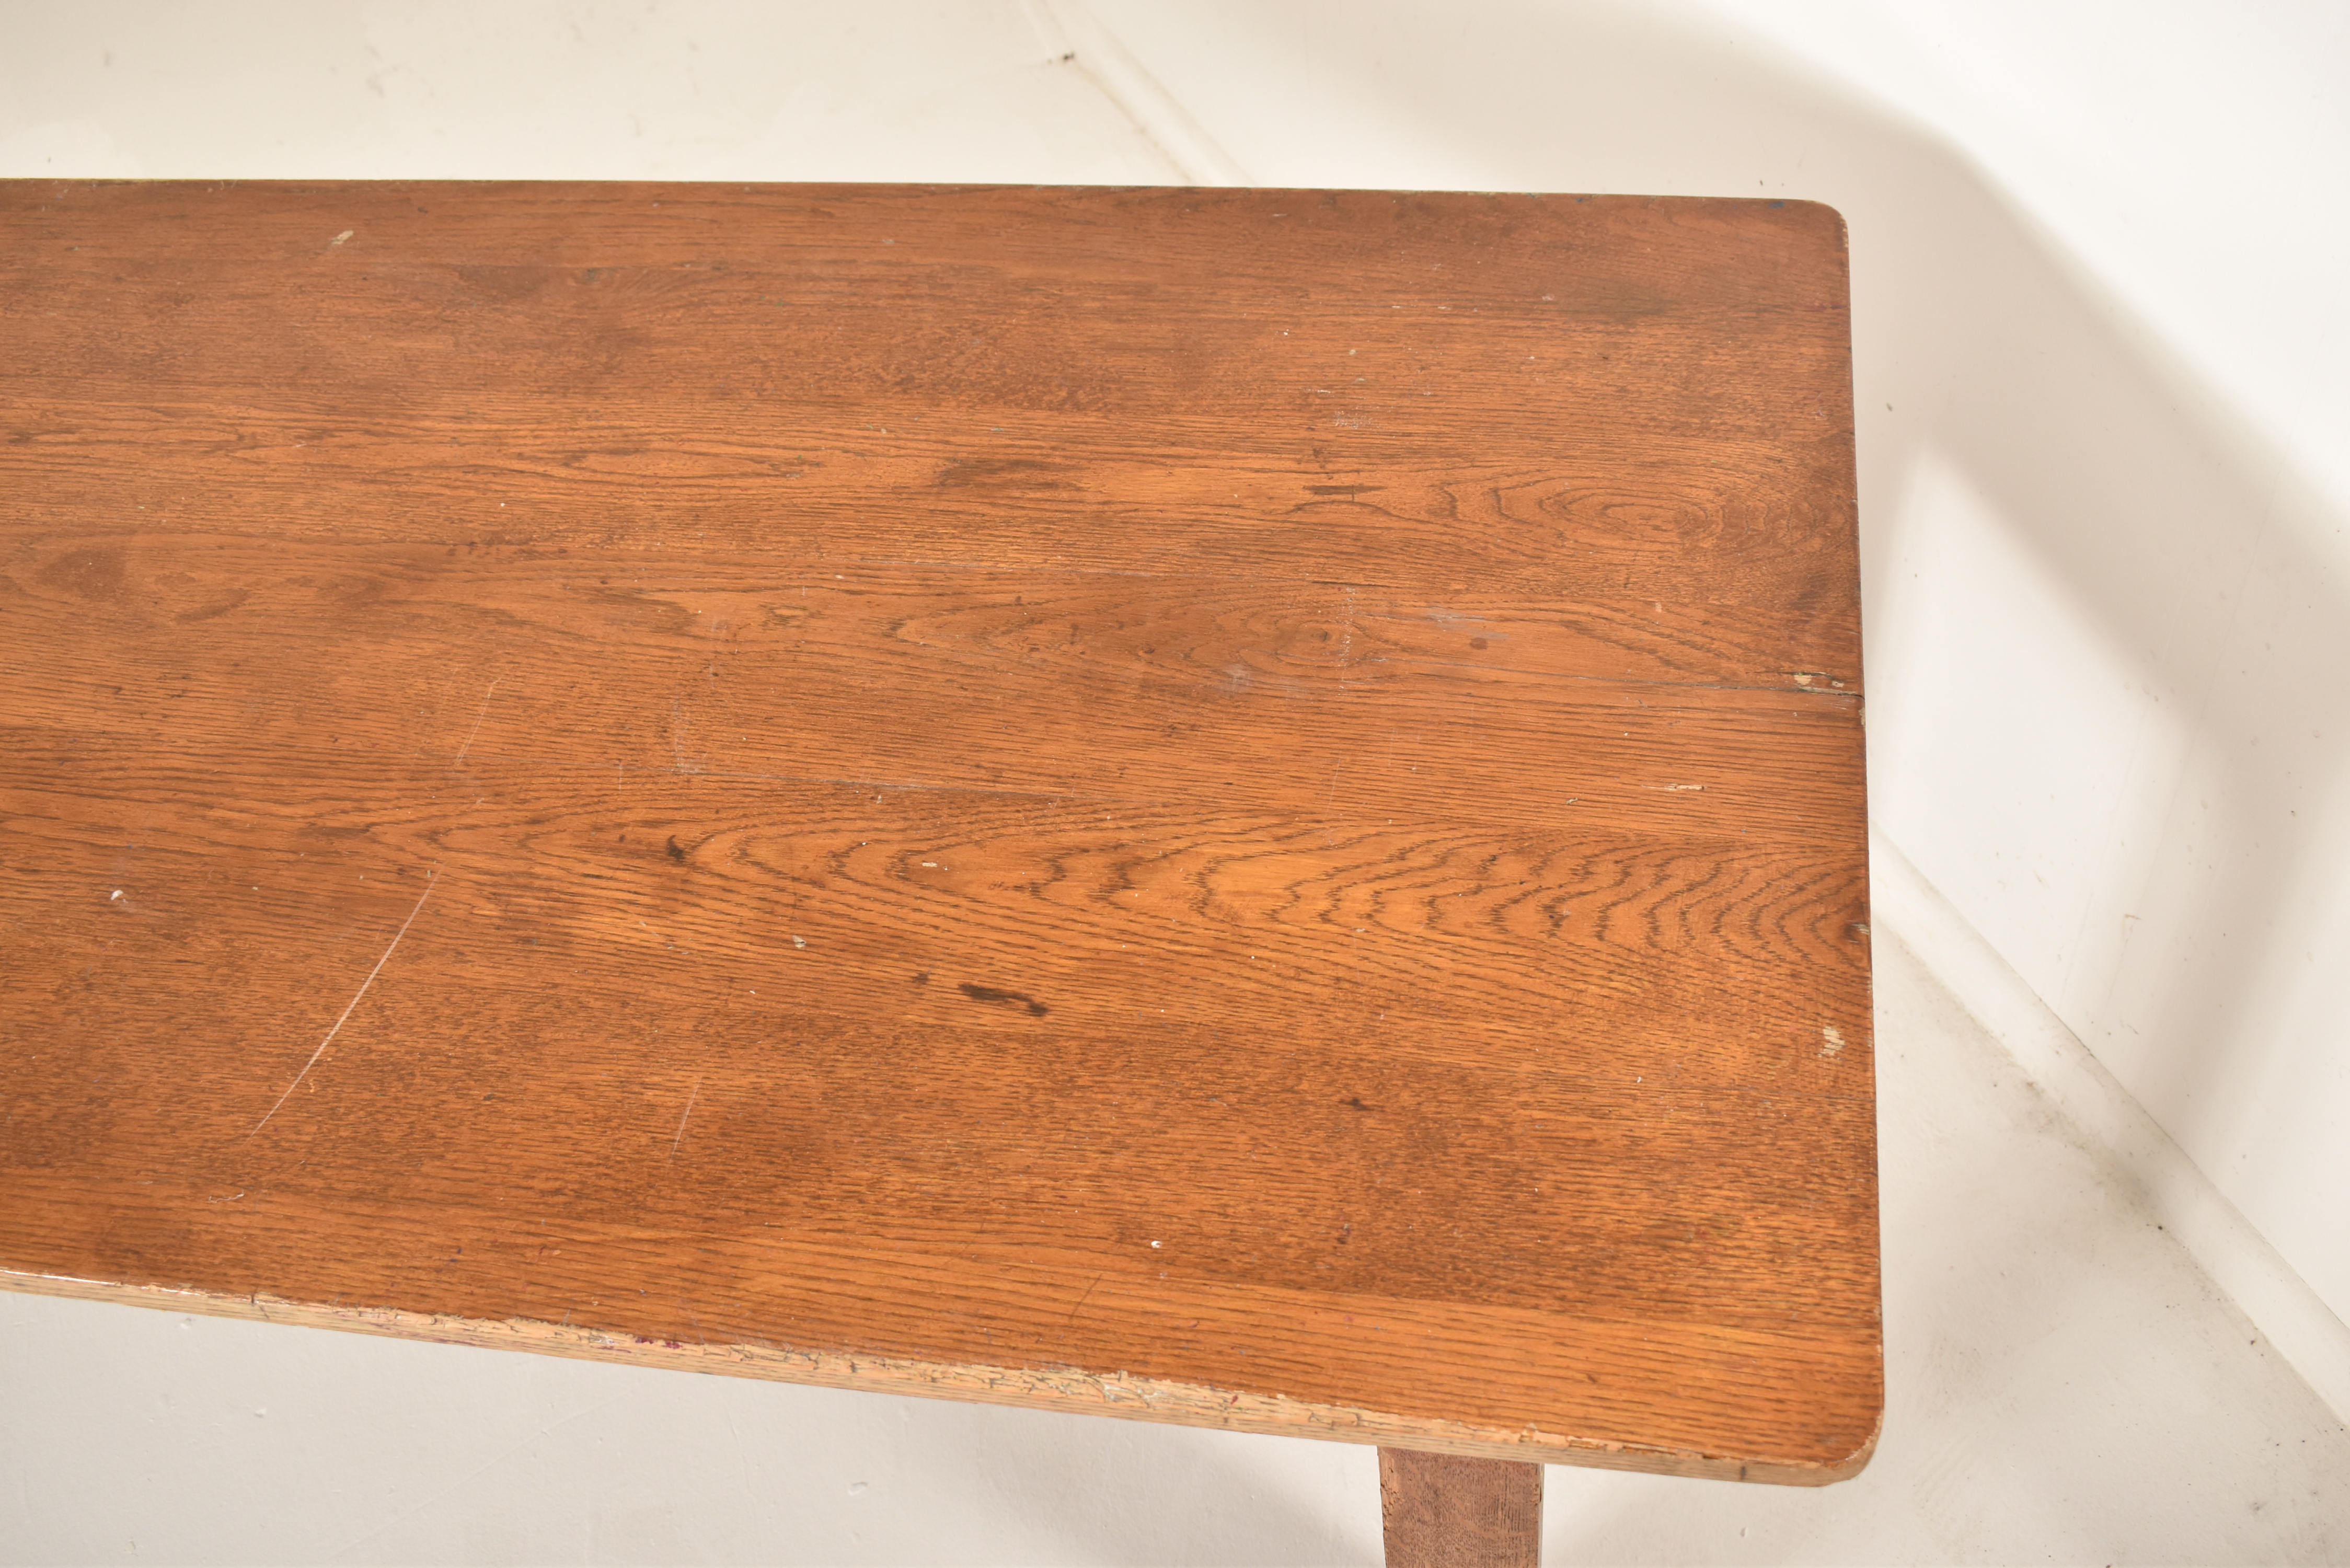 EARLY 20TH CENTURY ELM WOOD PLANK TOP REFECTORY TABLE - Image 4 of 6